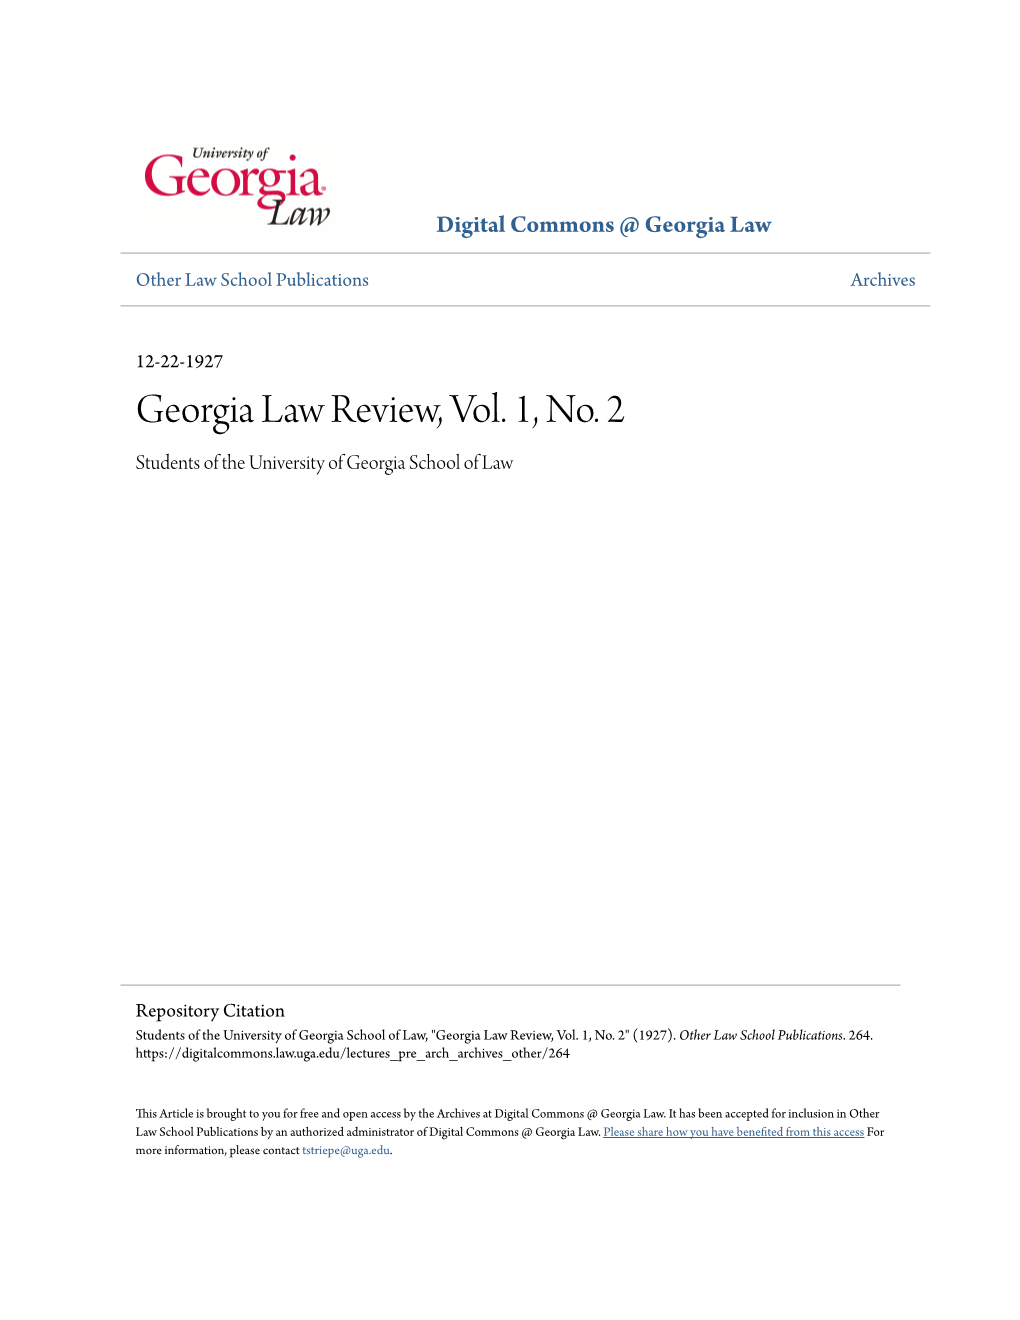 Georgia Law Review, Vol. 1, No. 2 Students of the University of Georgia School of Law